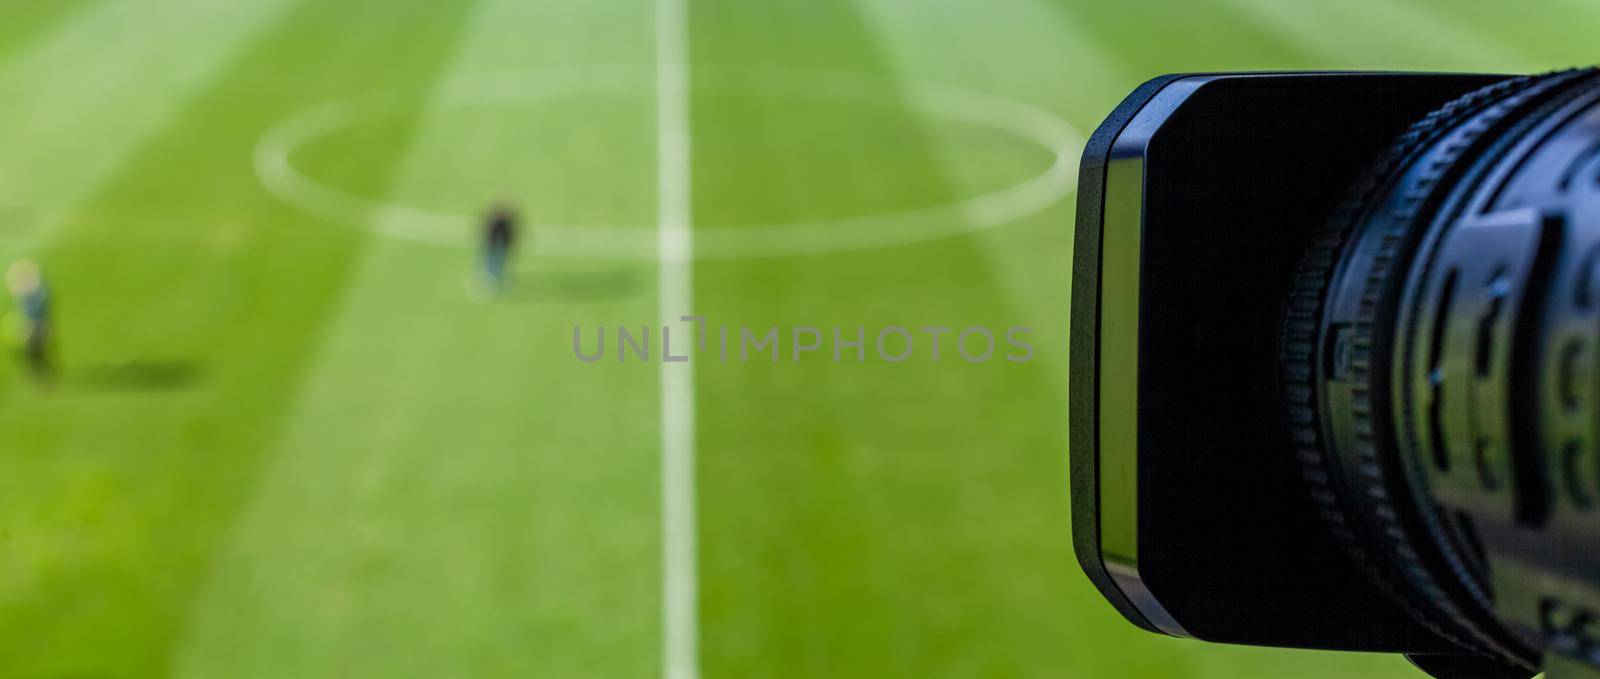 camera for live stream at a football stadium by Edophoto